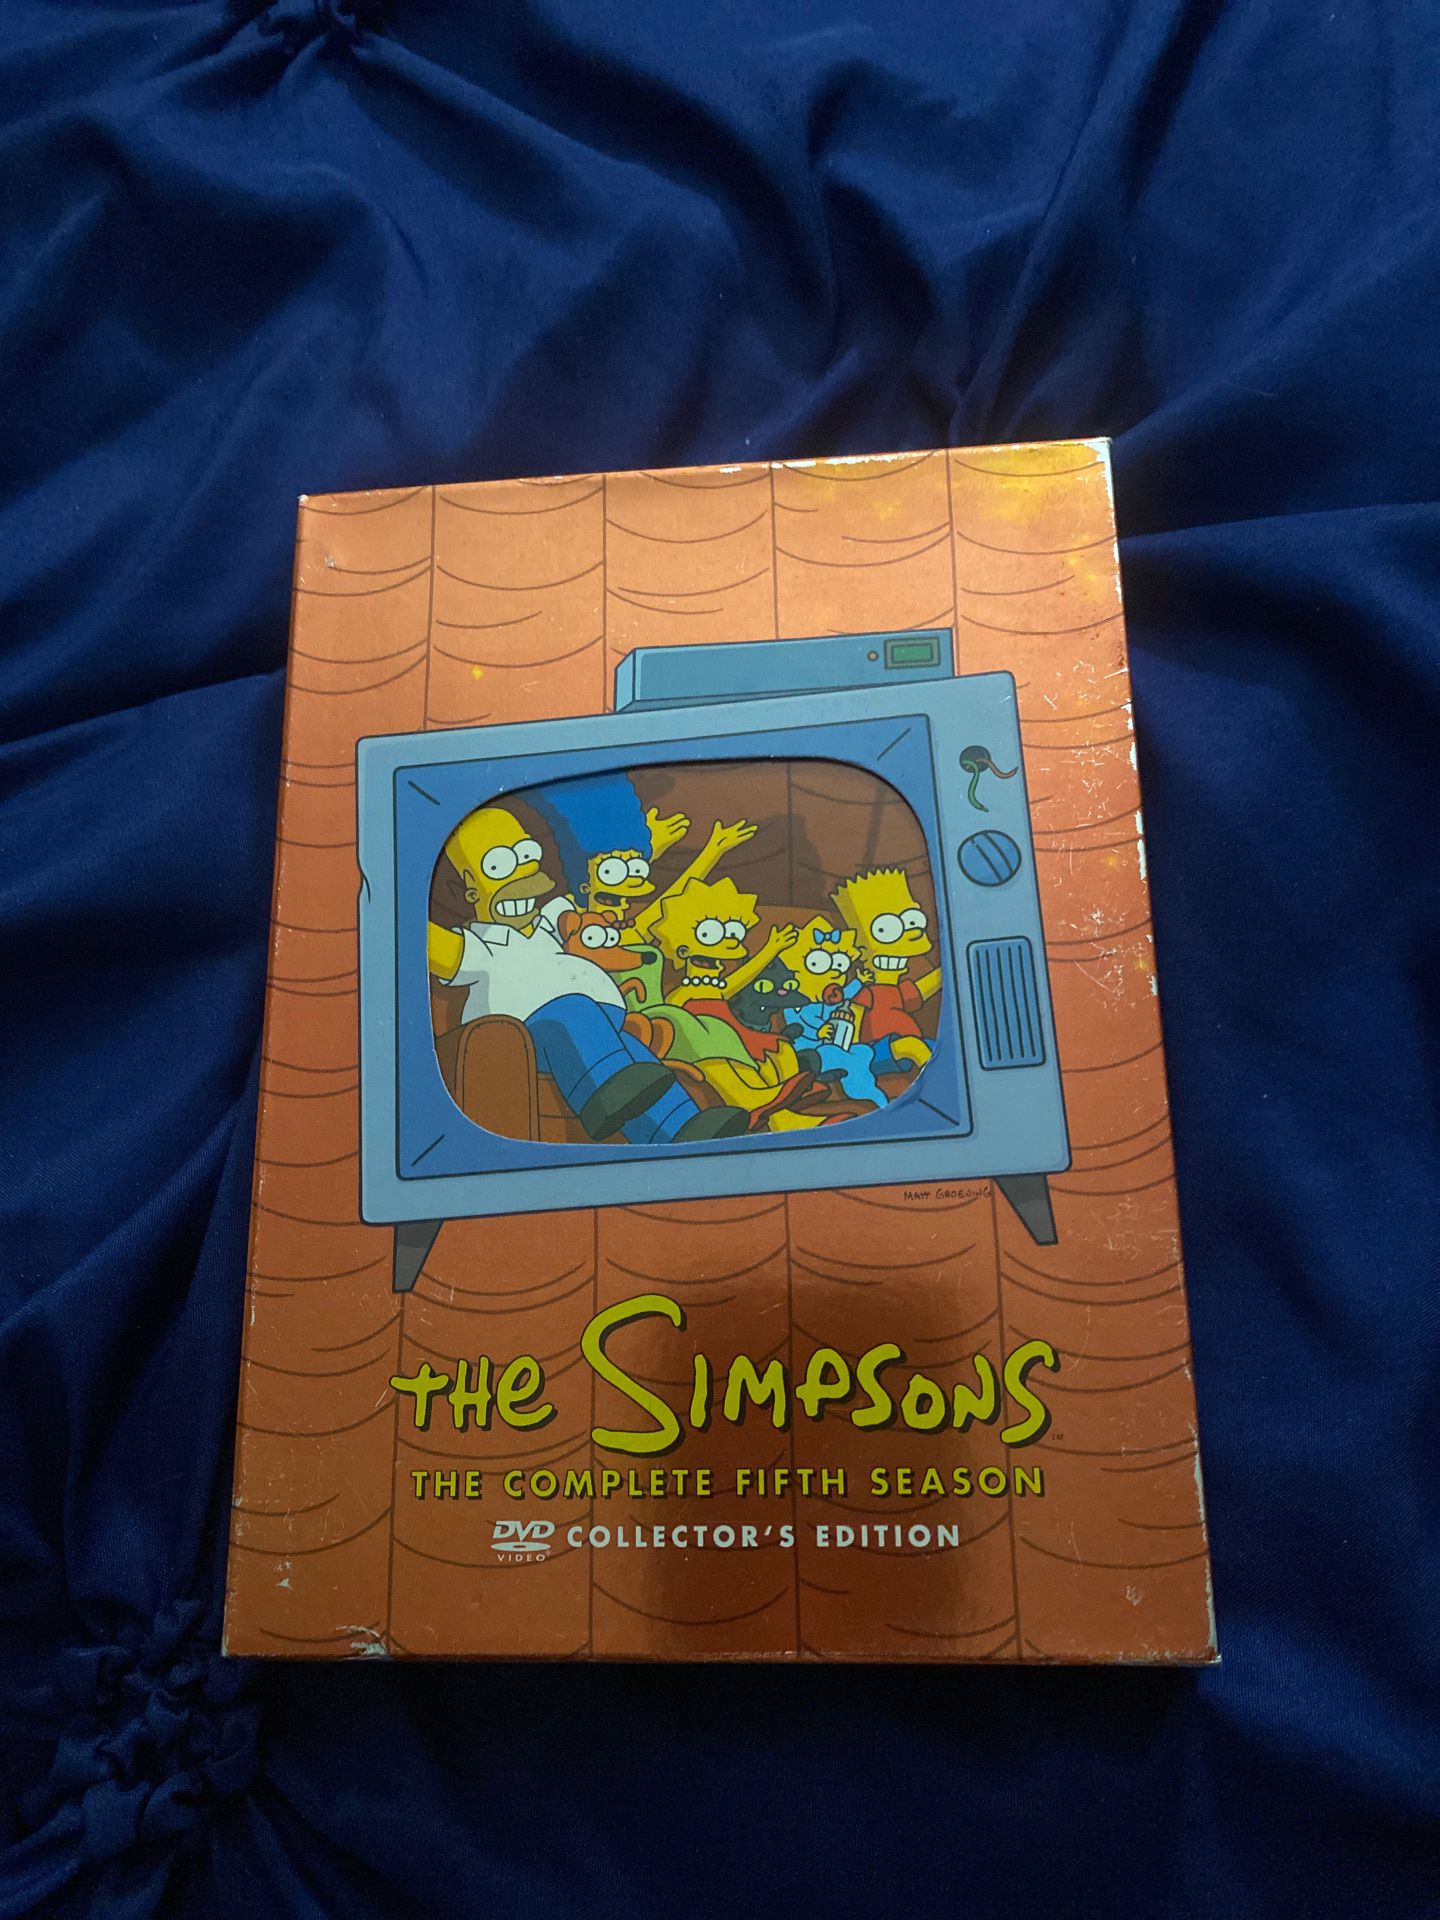 The Simpsons The Complete Fifth Season DVD 4 disc